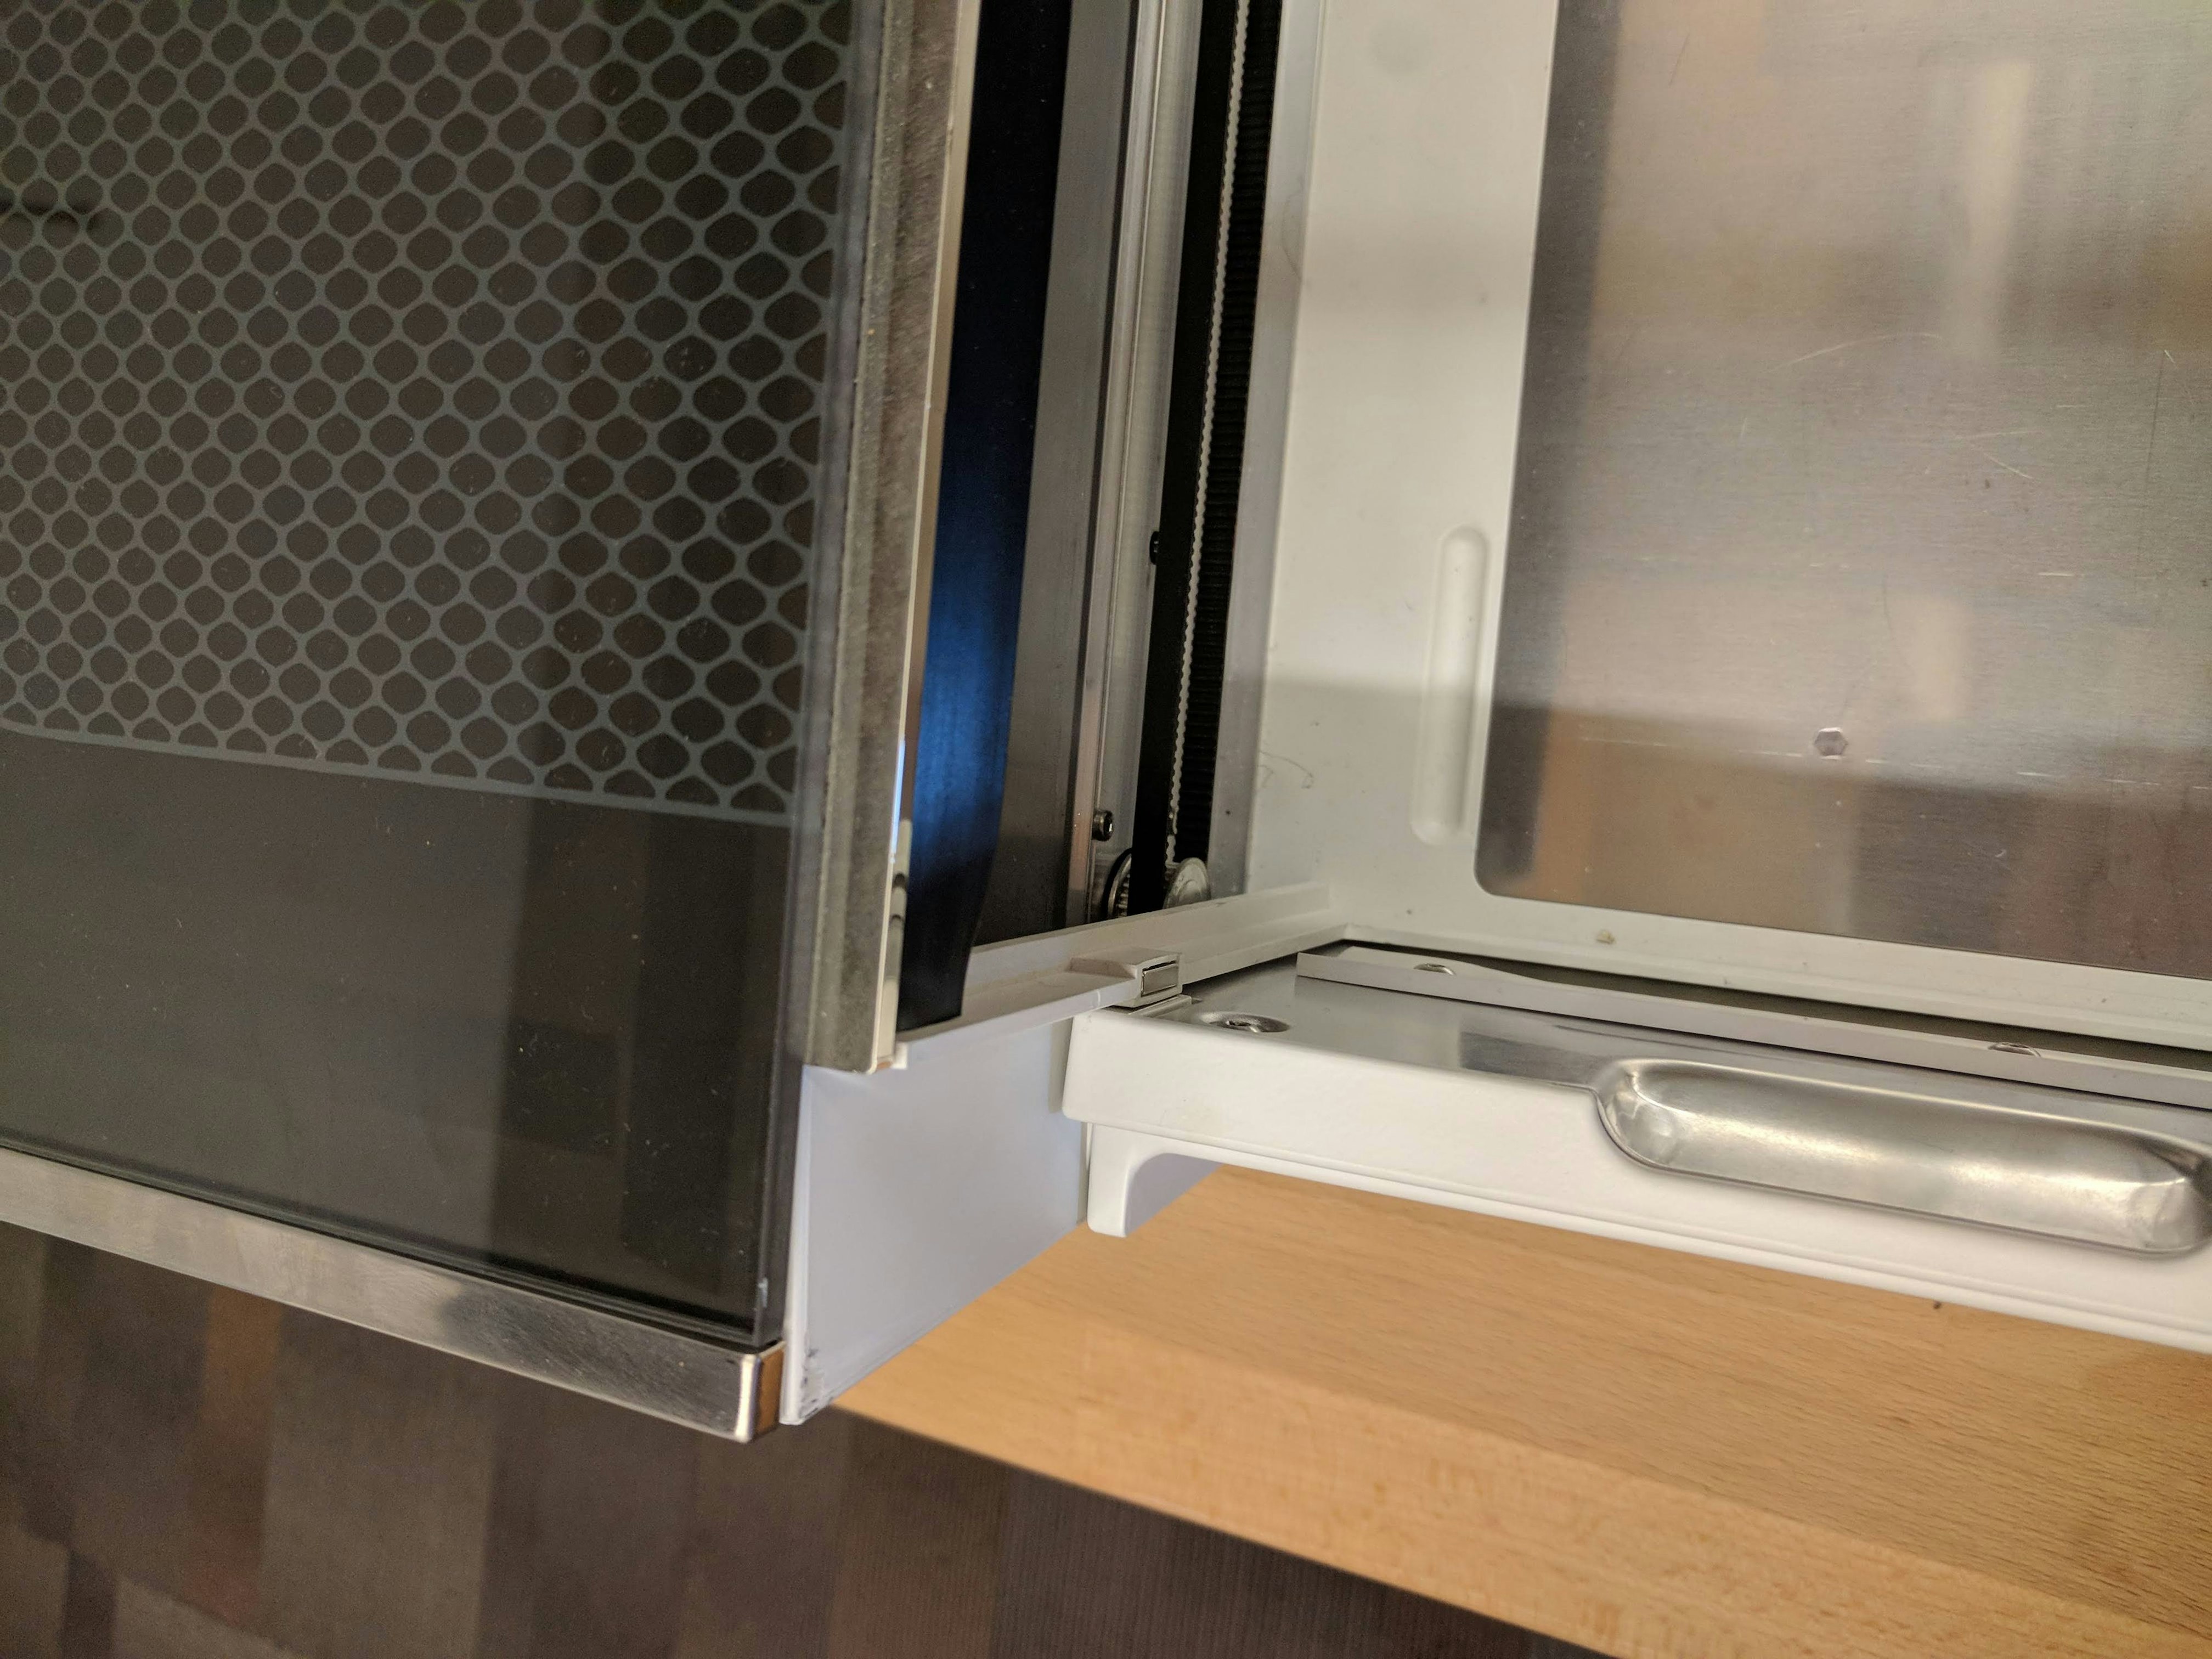 The left side of the closed front door of the Glowforge with the lid open. The door closes completely and there is no damage.